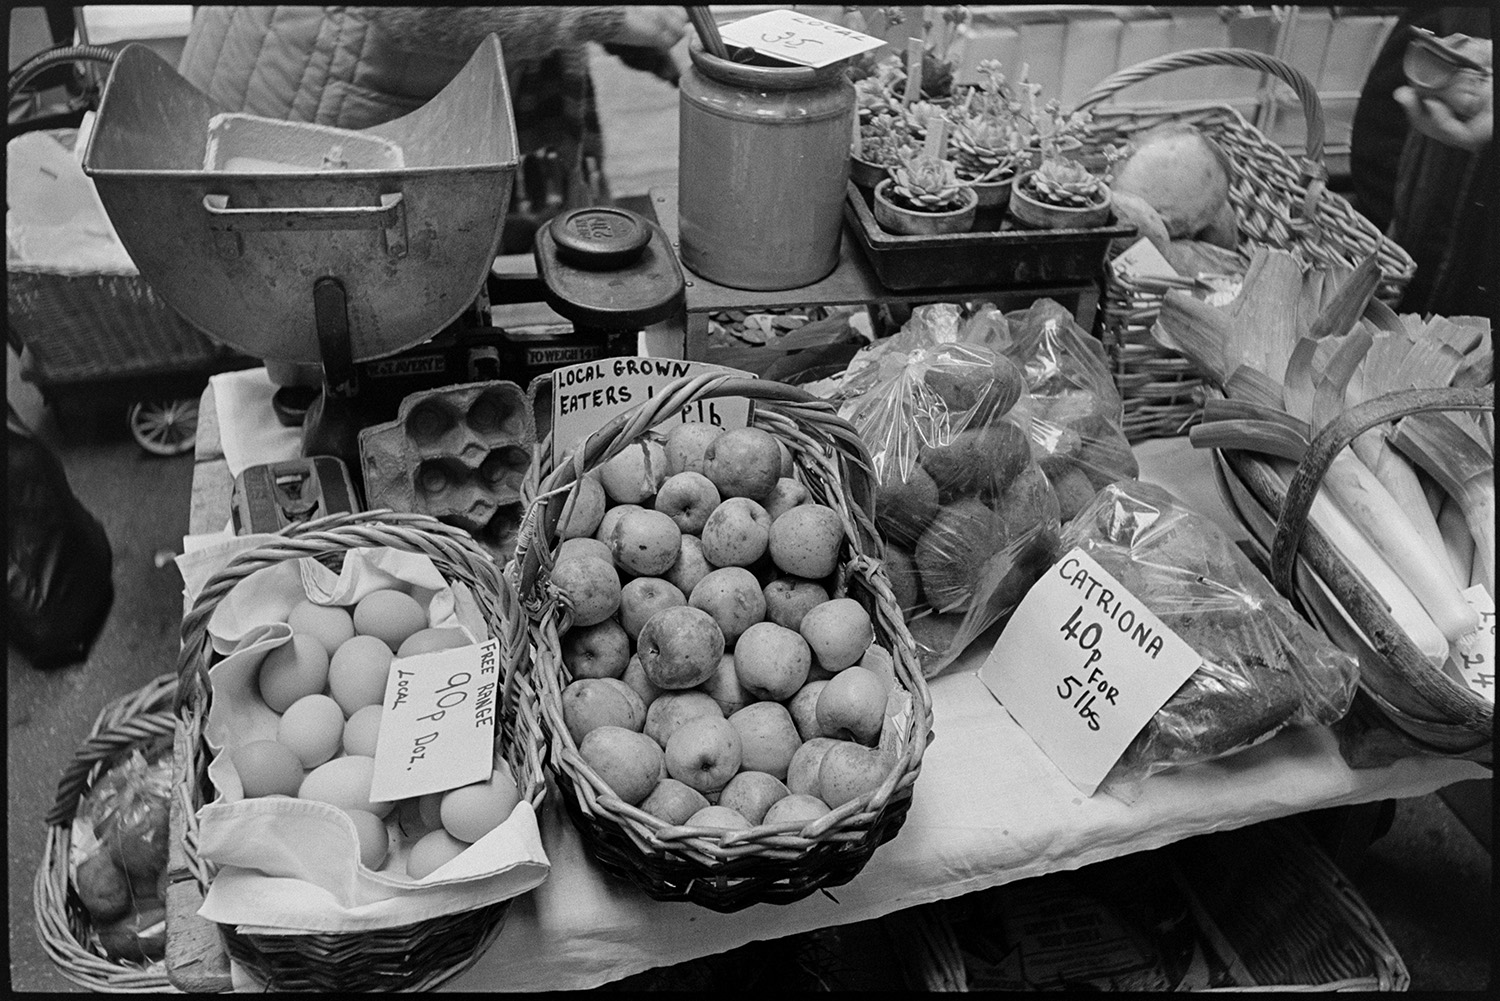 Fruit and vegetable stalls at pannier market, baskets, weighing machine.
[Scales with weights, plants, eggs apples, leeks and other vegetables on a stall in Barnstaple Pannier Market. ]